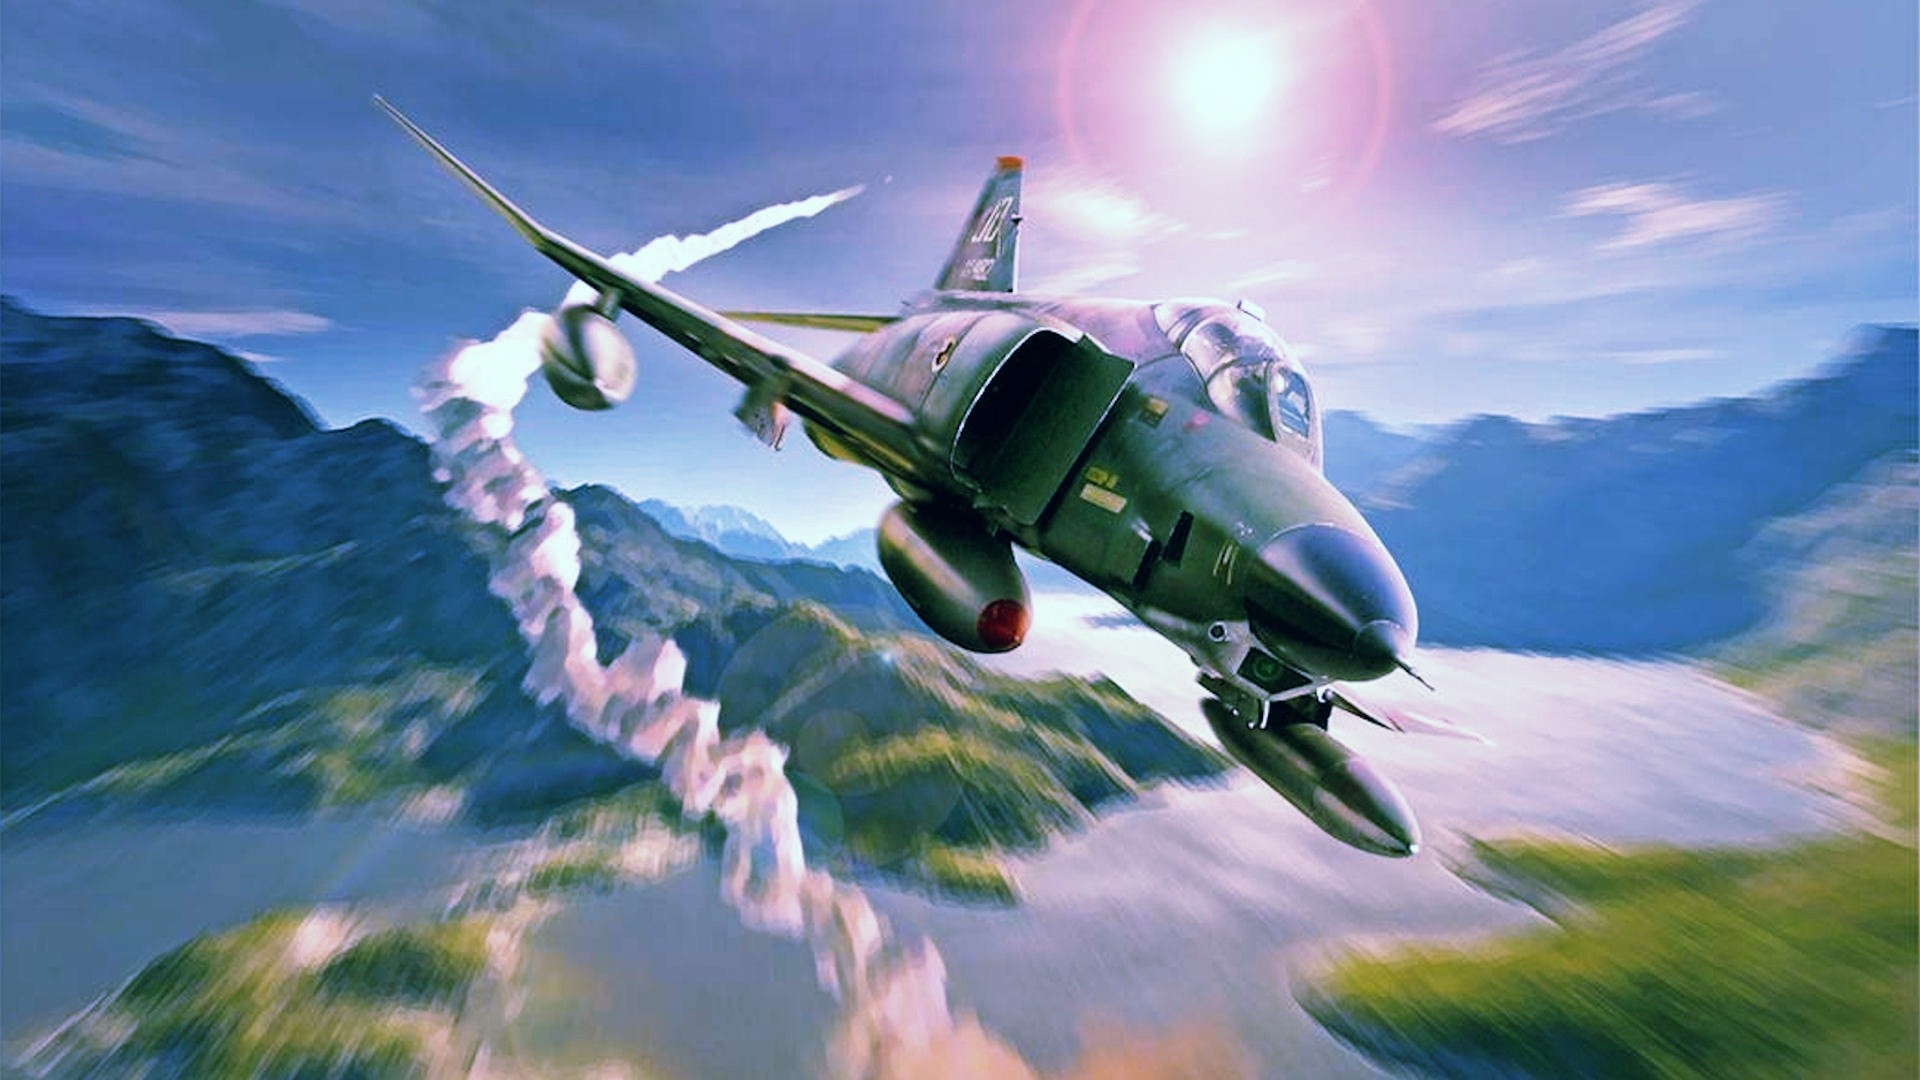 1920x1080 Military Fighter Jet Ride - HD Wallpapers Widescreen - 